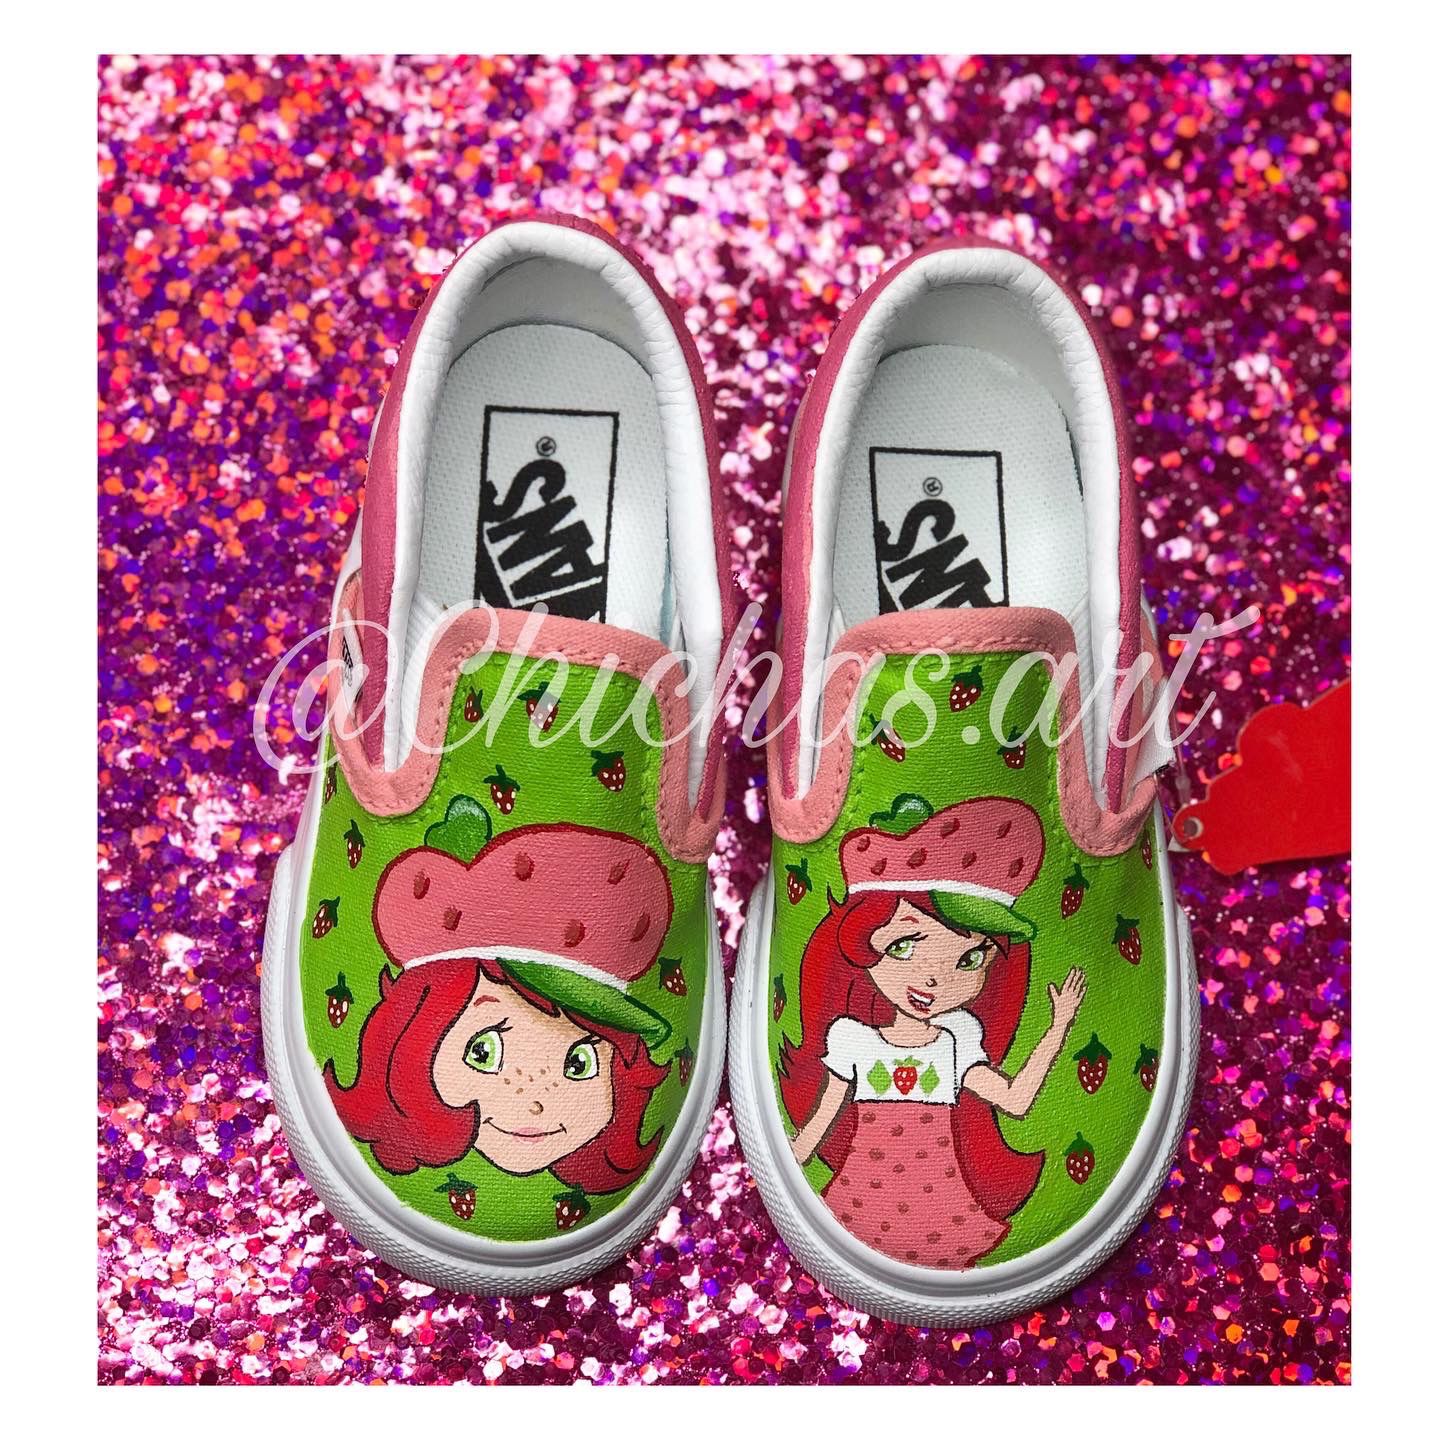 Custom Painted Shoes! Disney Princess Beauty And The Beast Belle, Toy Story, Hercules, Naurto, Haunted Mansion , Disneyland, Rick And Morty, Coco,